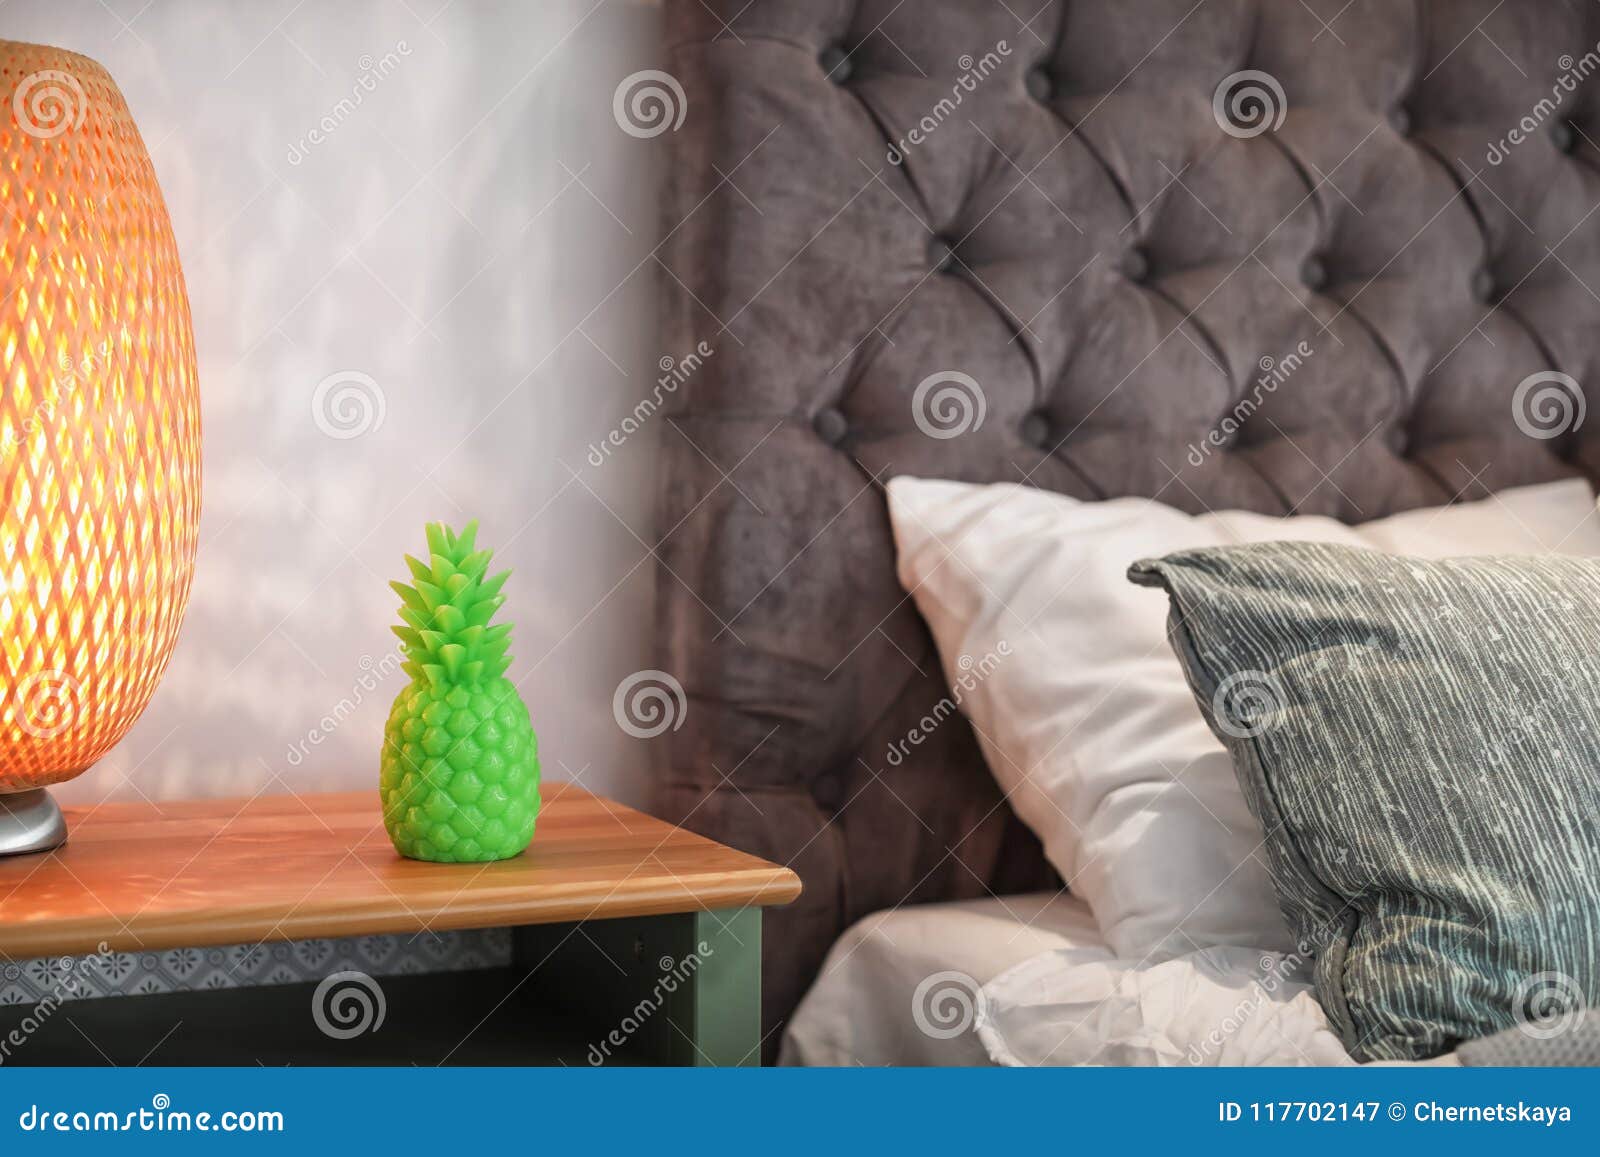 pineapple d candle and lamp on bedside table